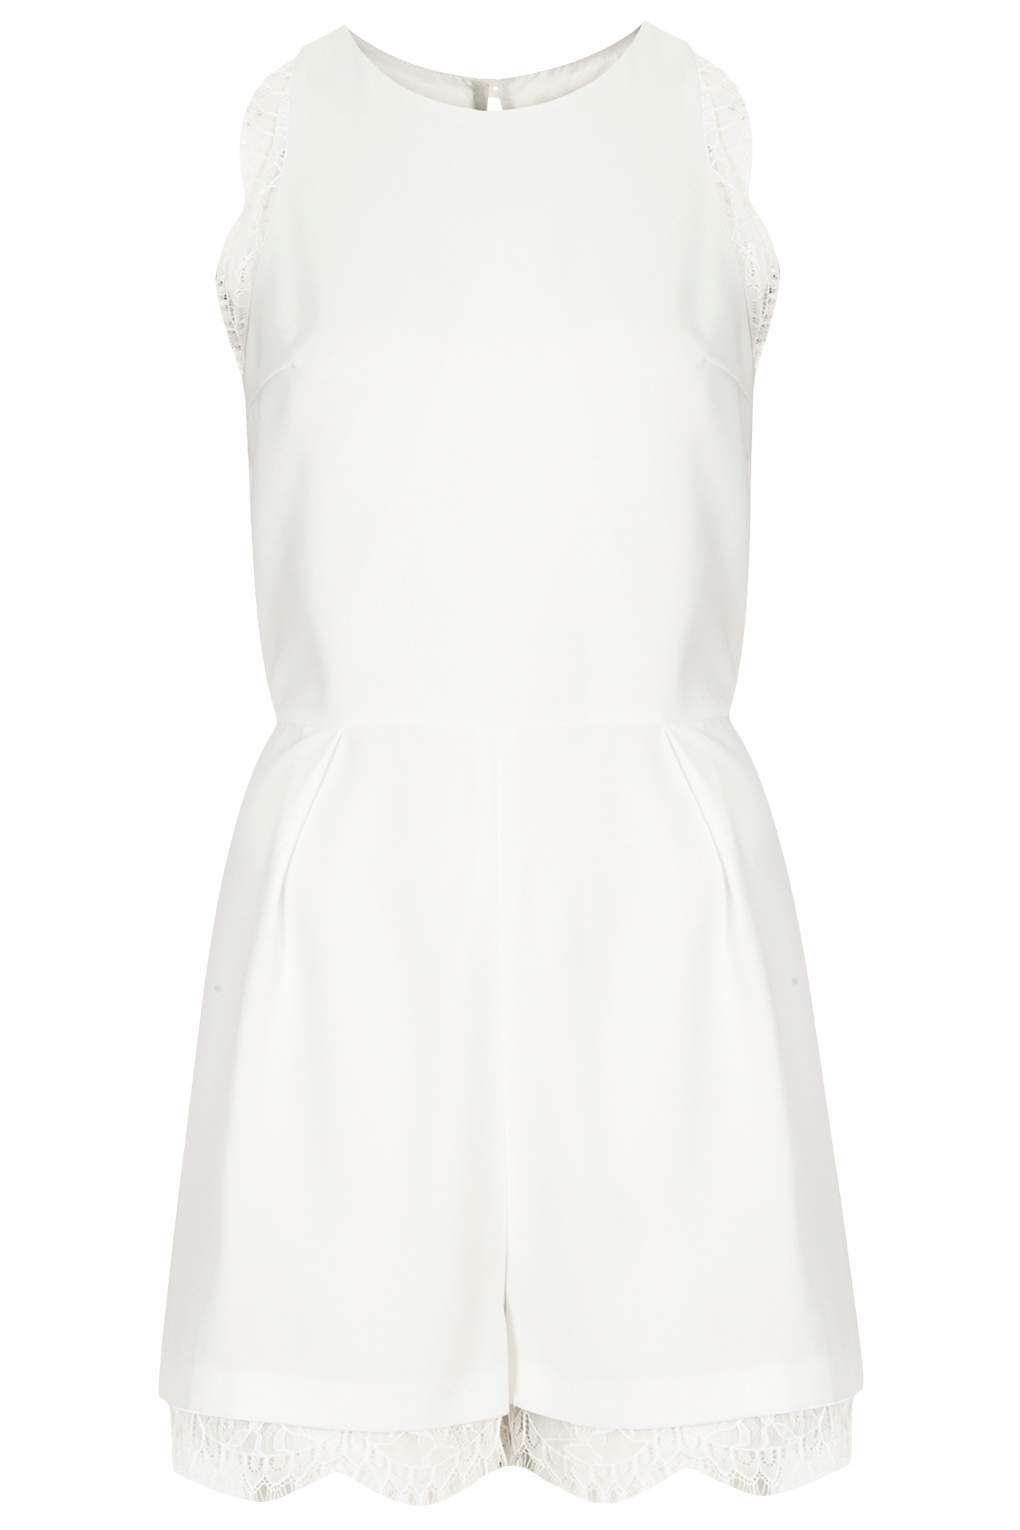 Lyst - Topshop Pretty Lace Playsuit in White